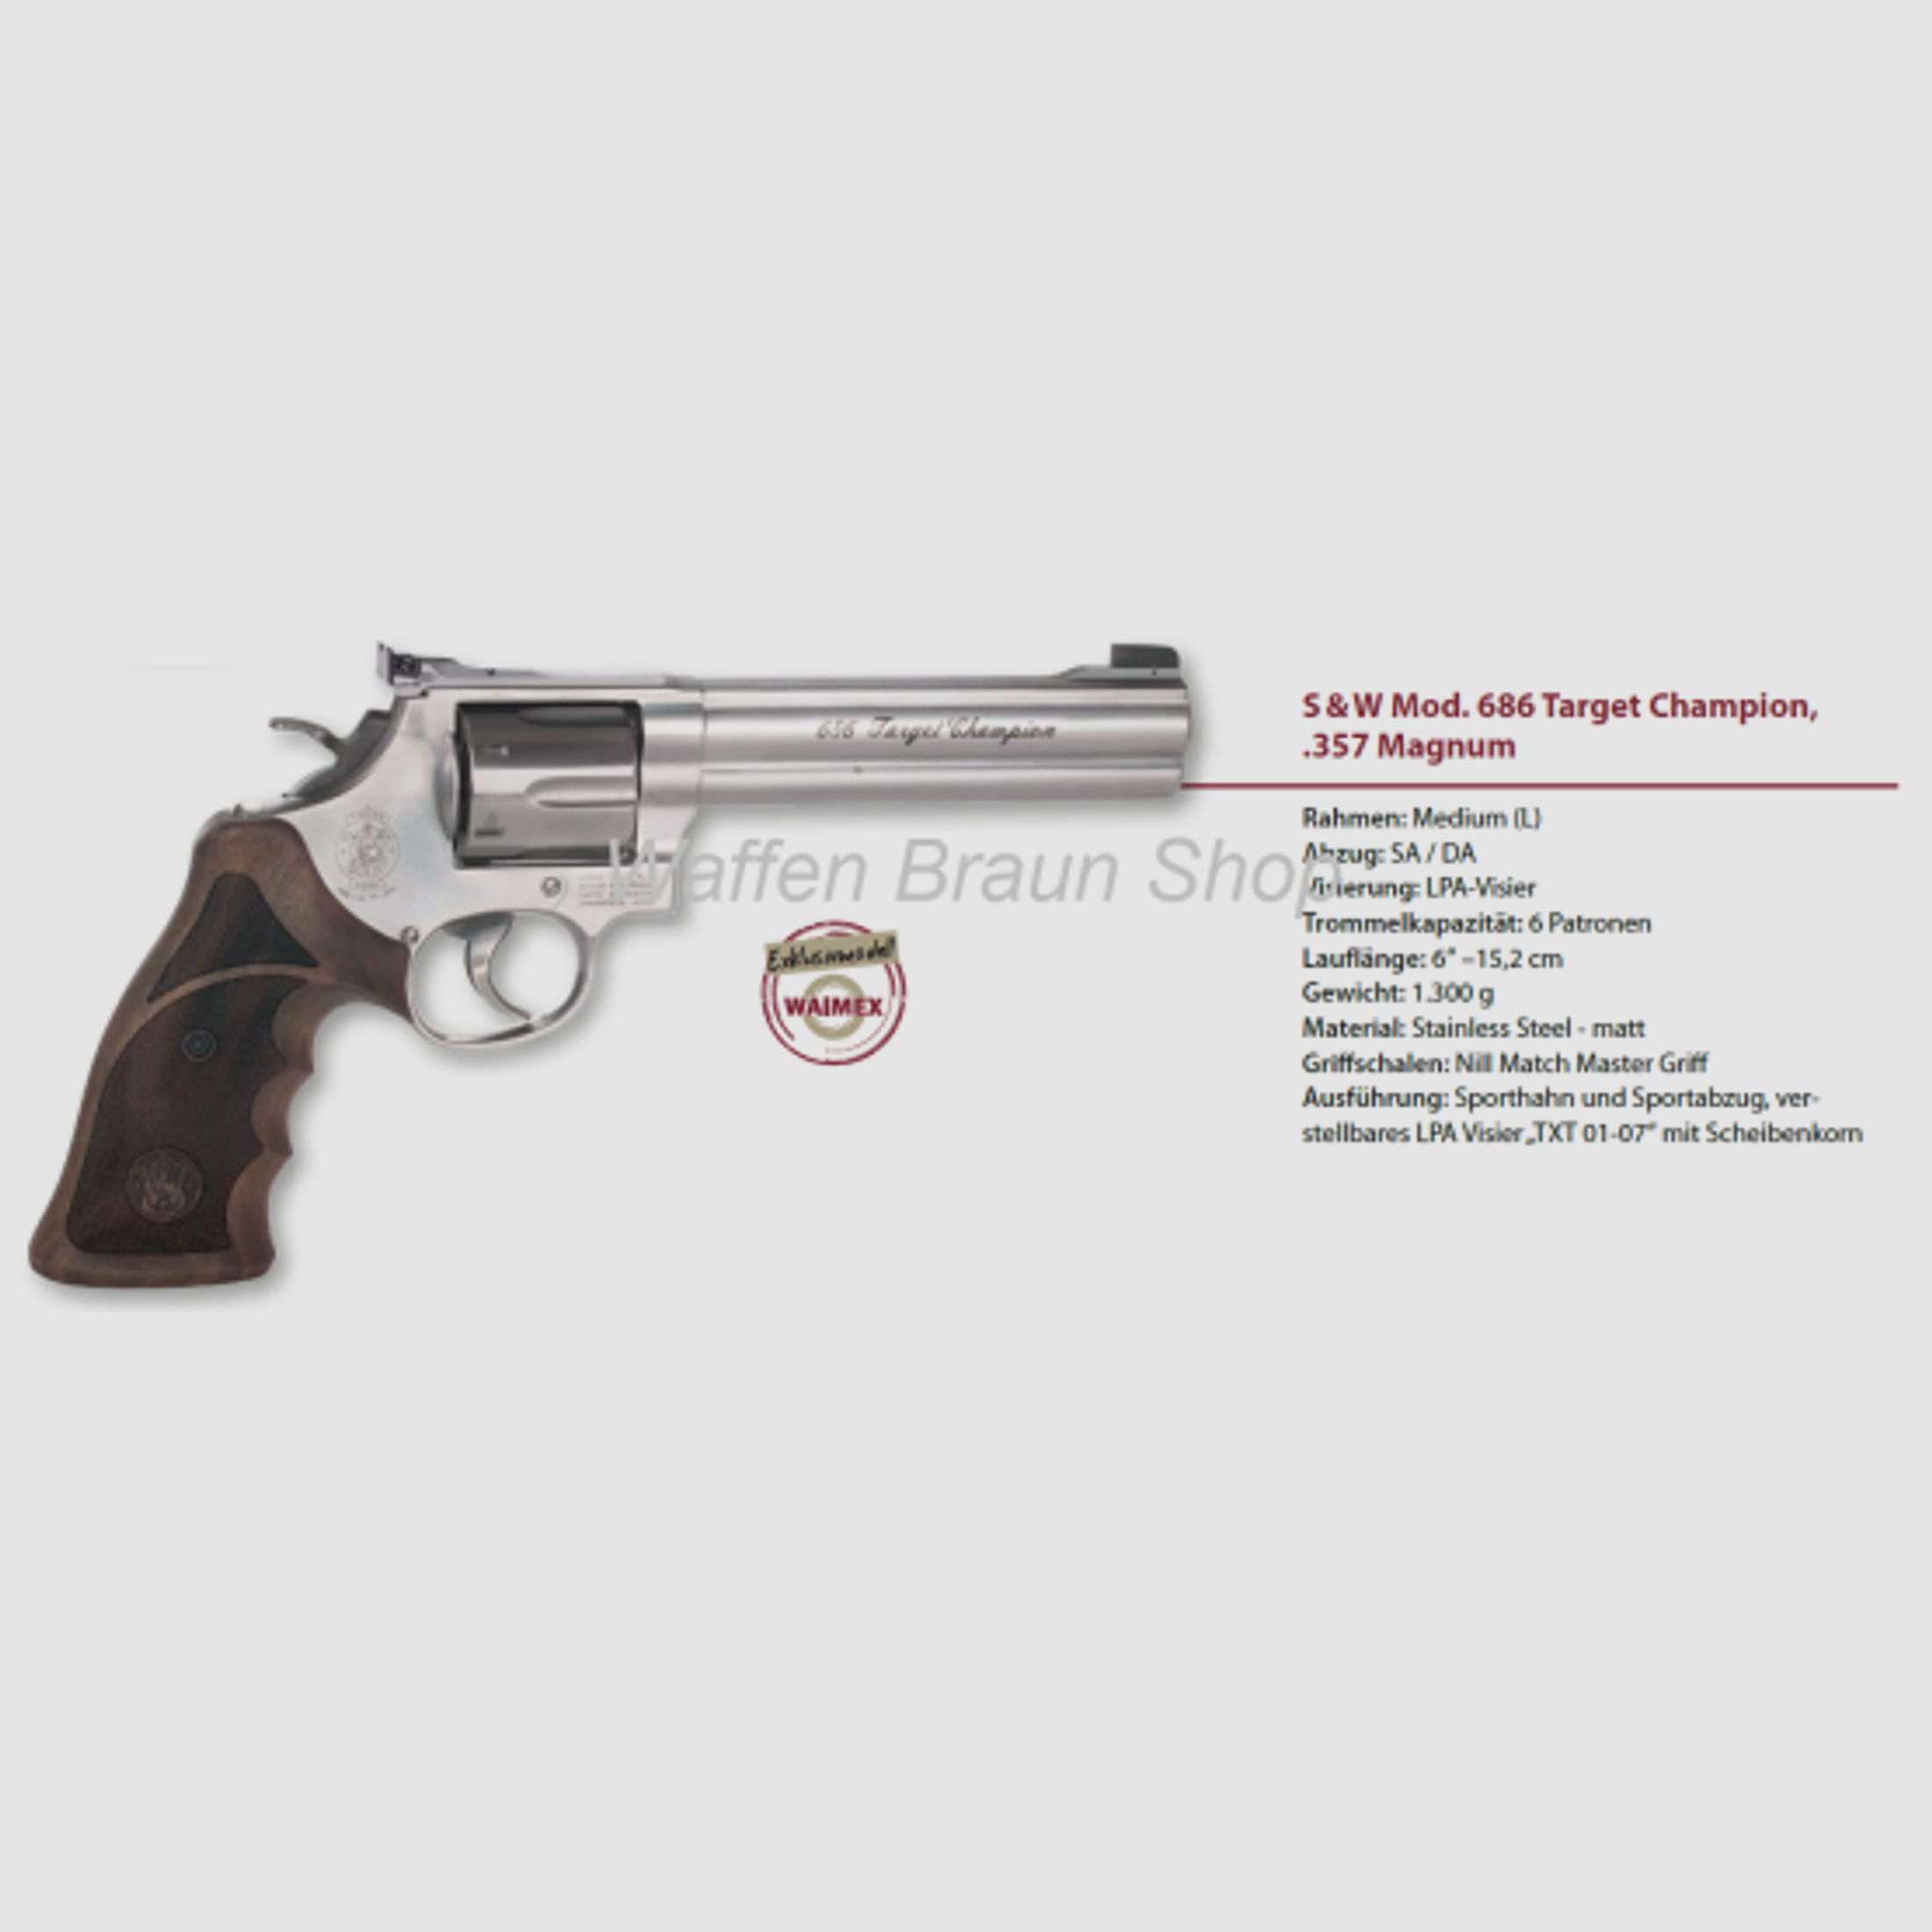 Smith & Wesson Mod 686 Target Champion 357 Mag